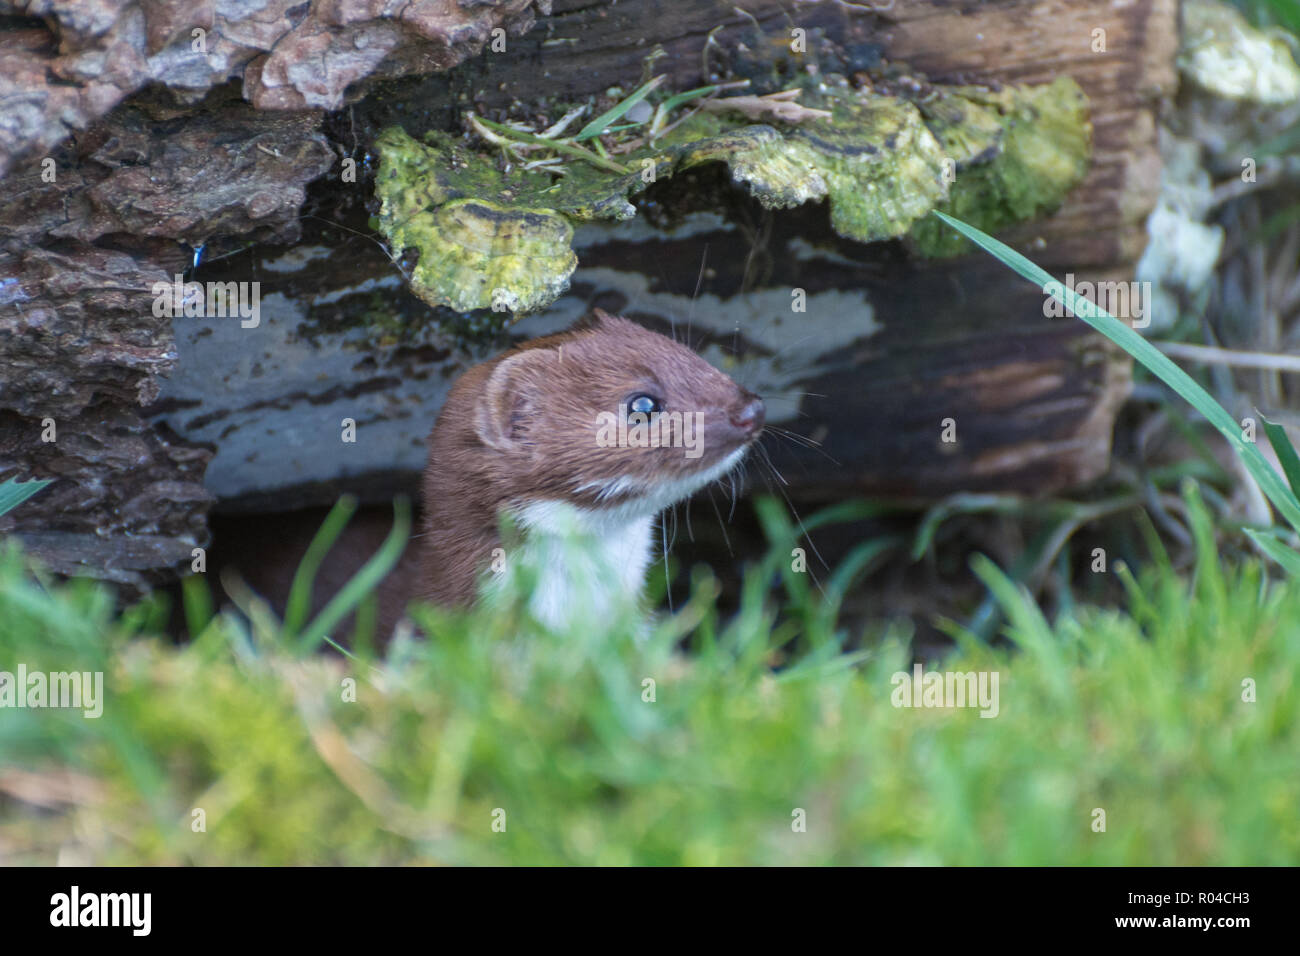 Weasel (Mustela nivalis) peeking out of a hole in a log pile. The weasel is the smallest member of the mustelid family of mammals, and a carnivore Stock Photo